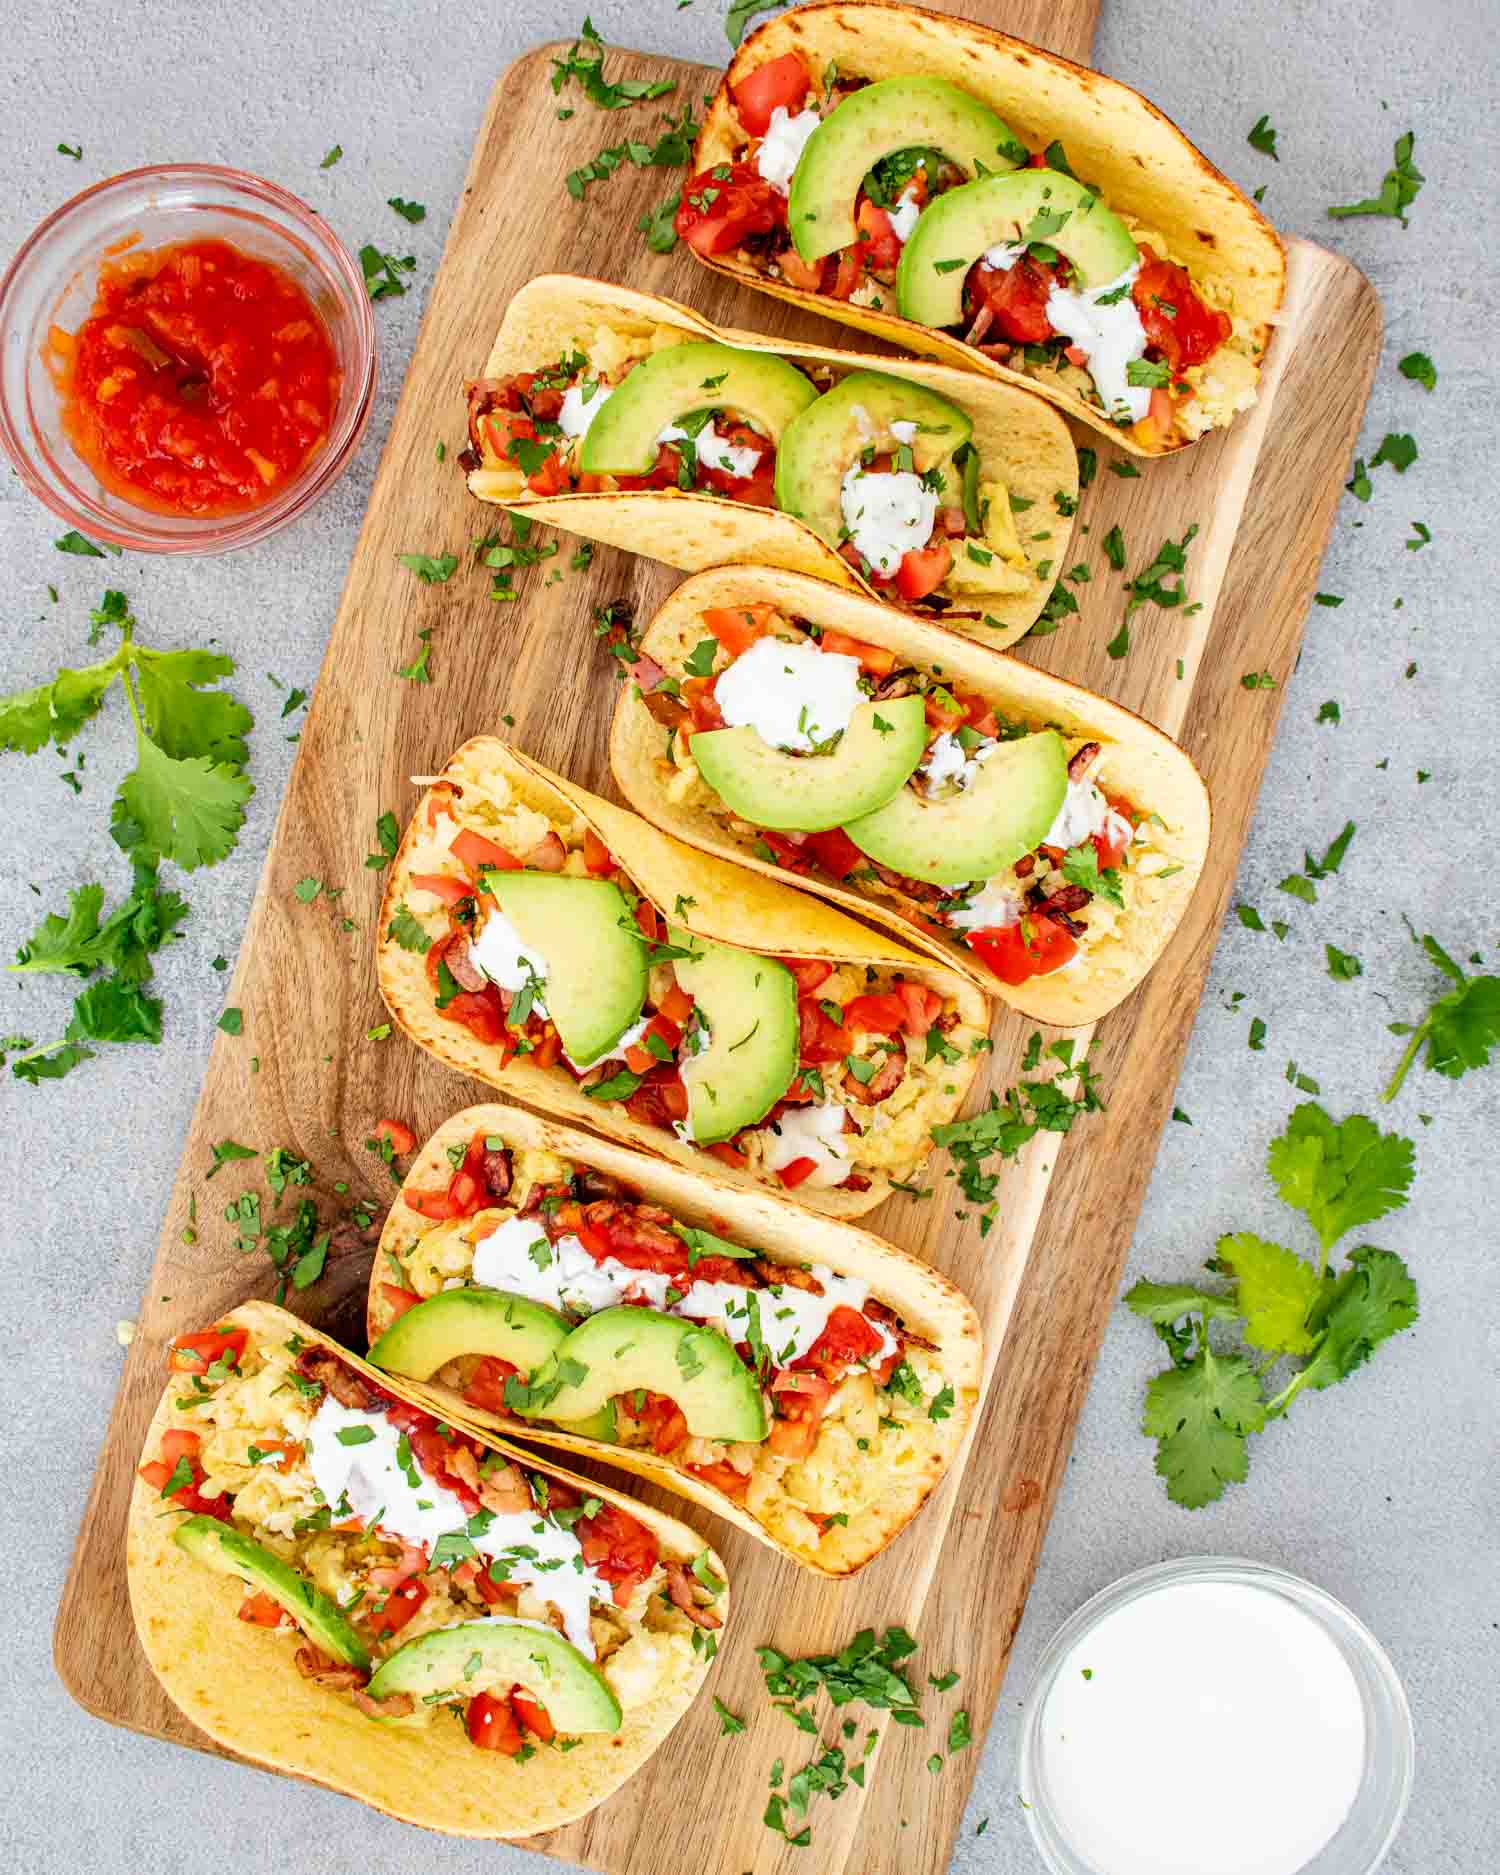 a cutting board with 6 tacos garnished with sour cream, salsa and avocados.